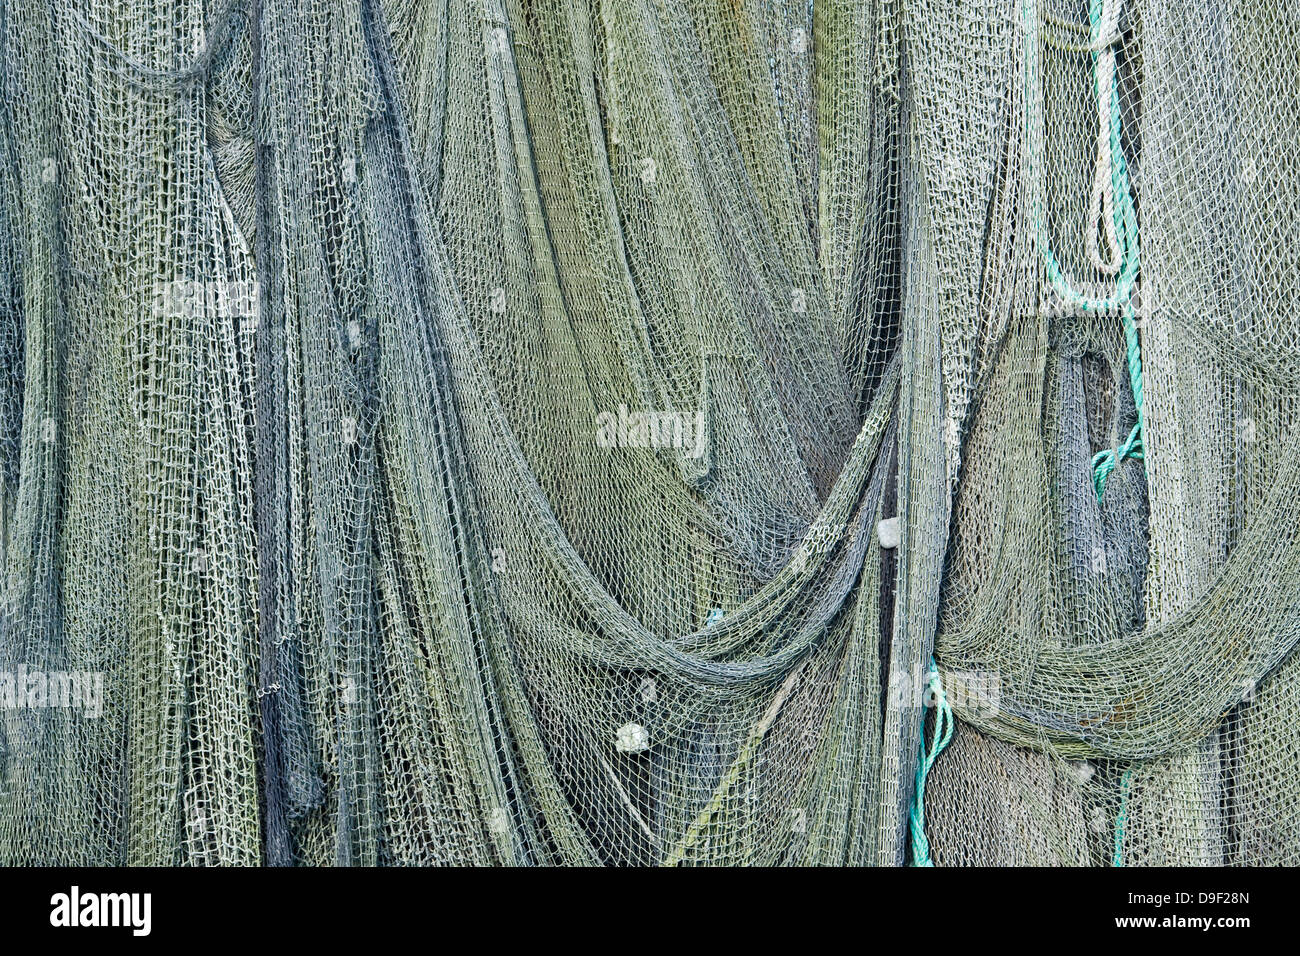 Fishing nets in the fishing port, Fishing of net in the fishing harbour Stock Photo